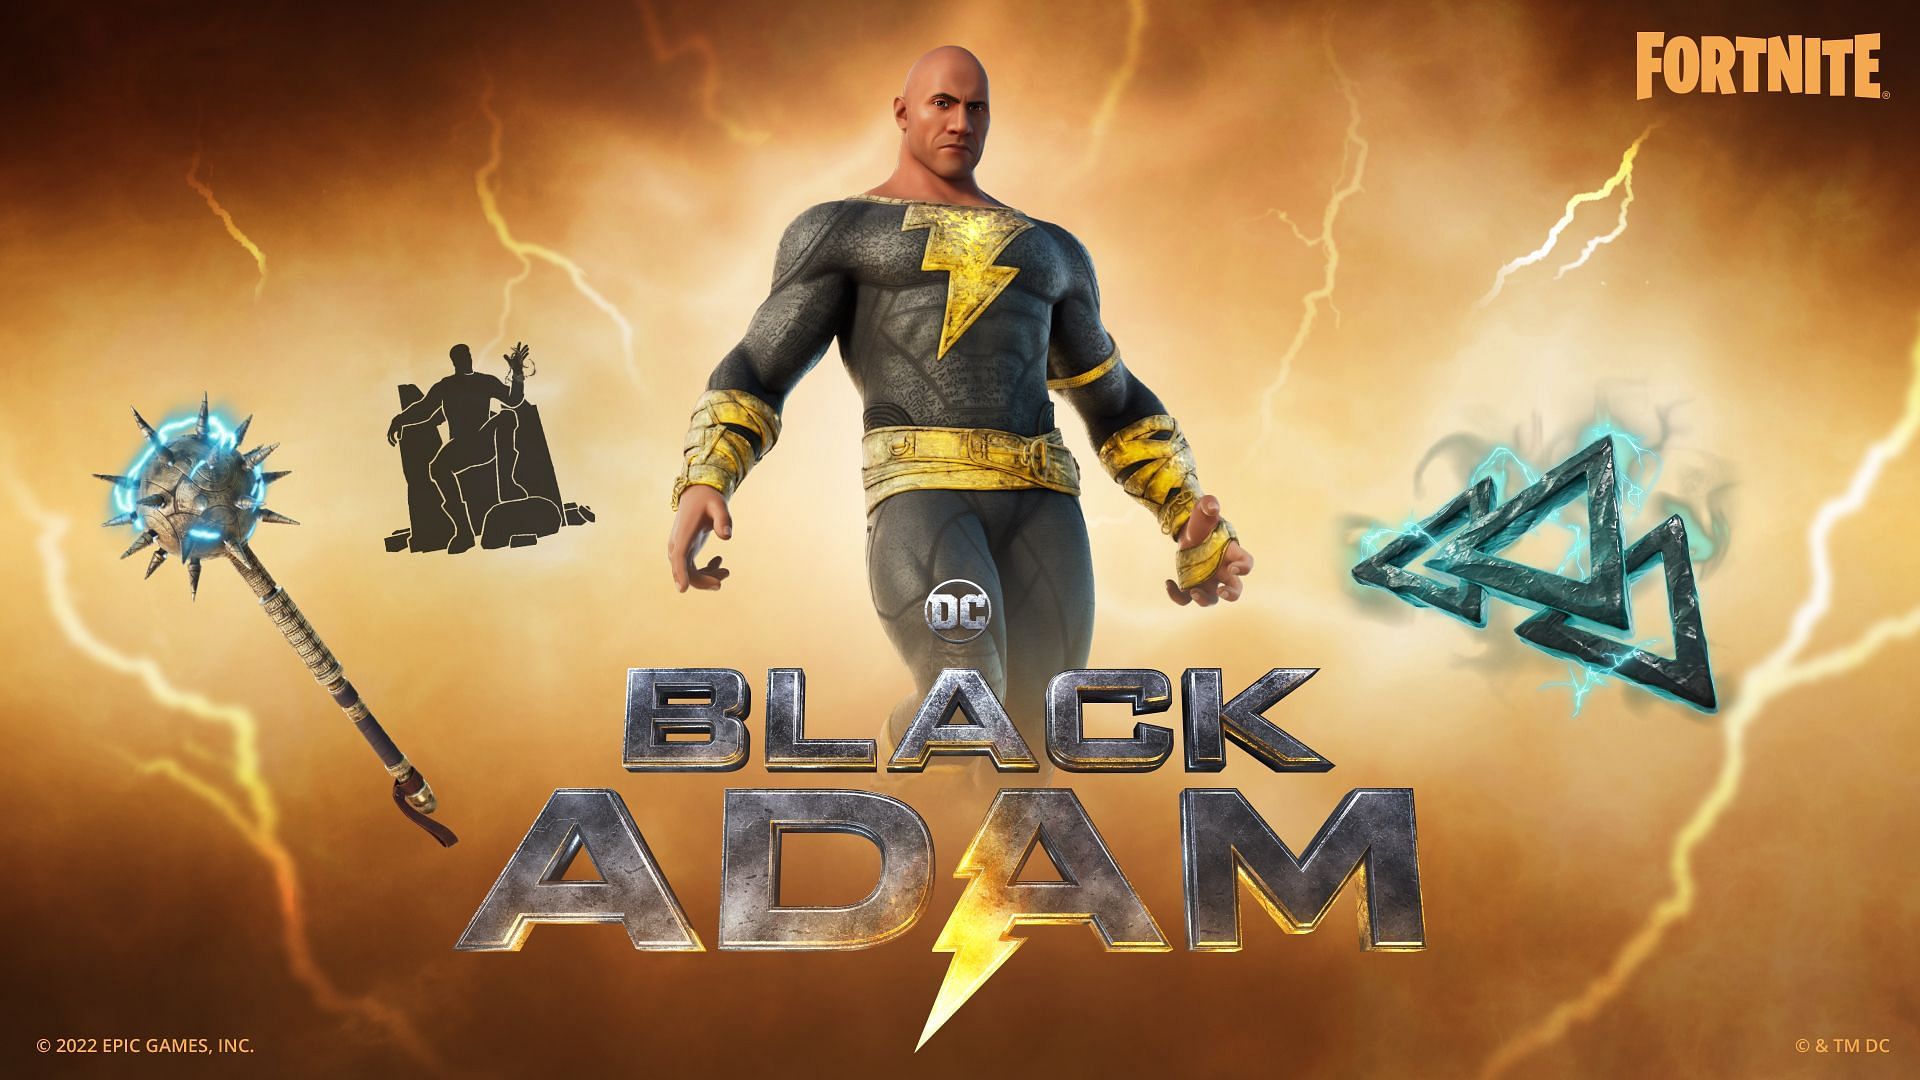 Black Adam in Fortnite? Who would have guessed it (Image via Epic Games/Fortnite)